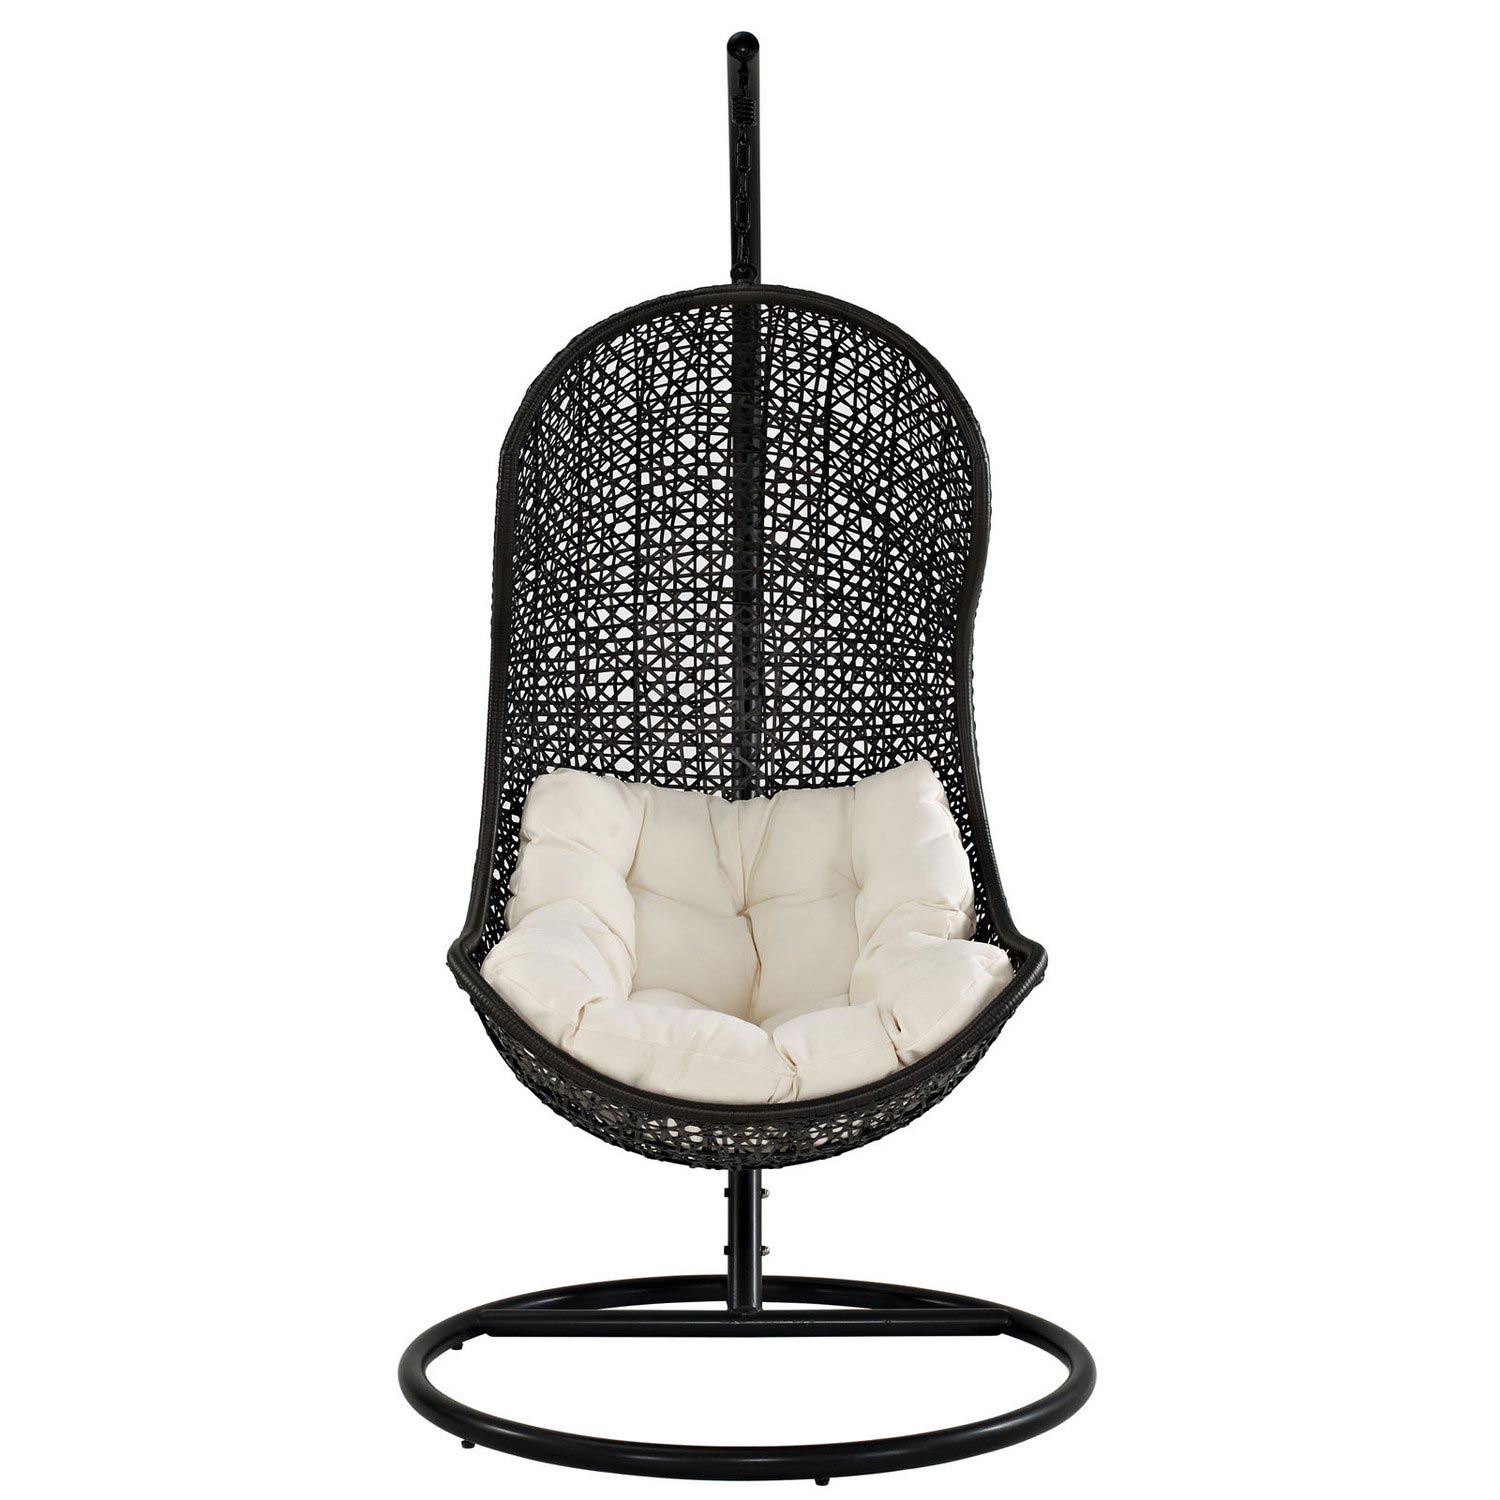 Modway Parlay Swing Outdoor Patio Lounge Chair - Espresso/White